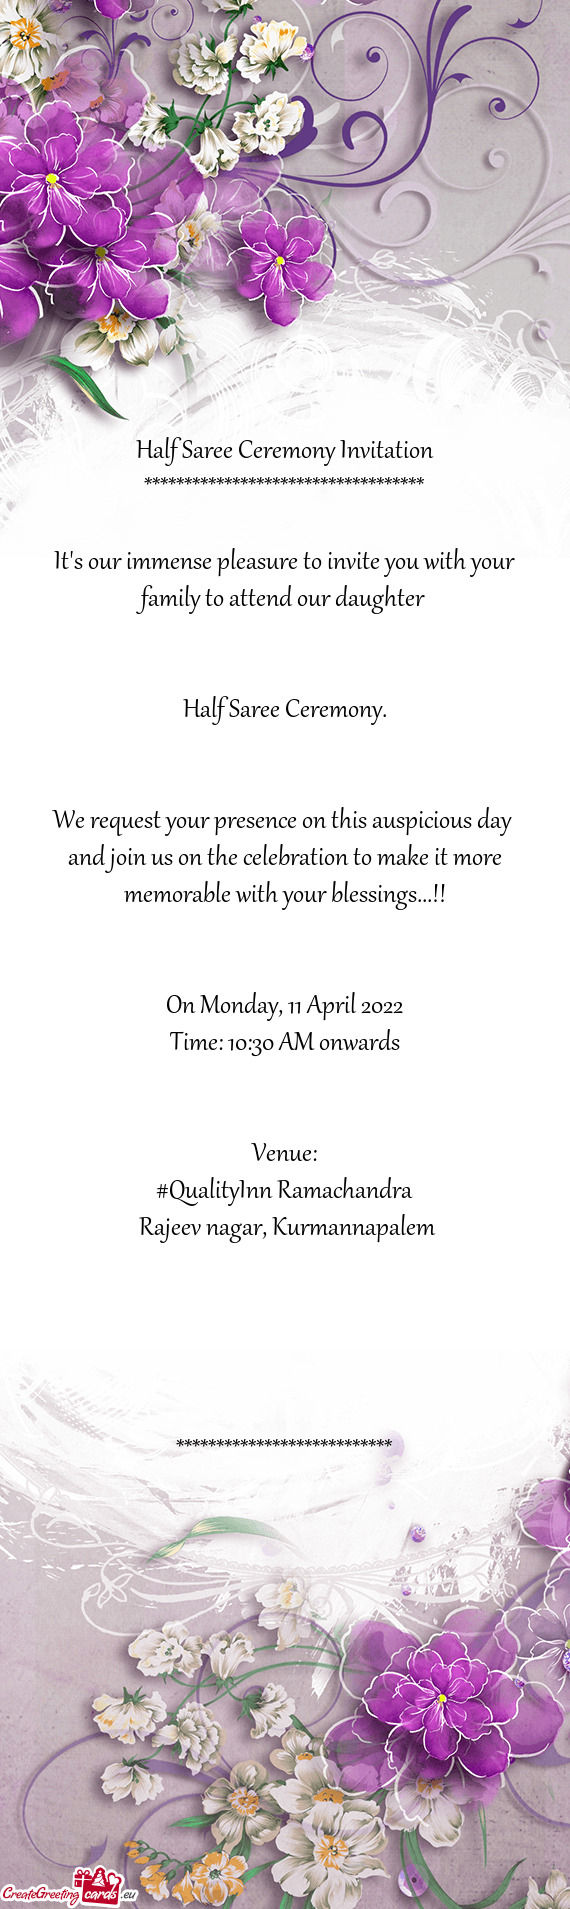 And join us on the celebration to make it more memorable with your blessings